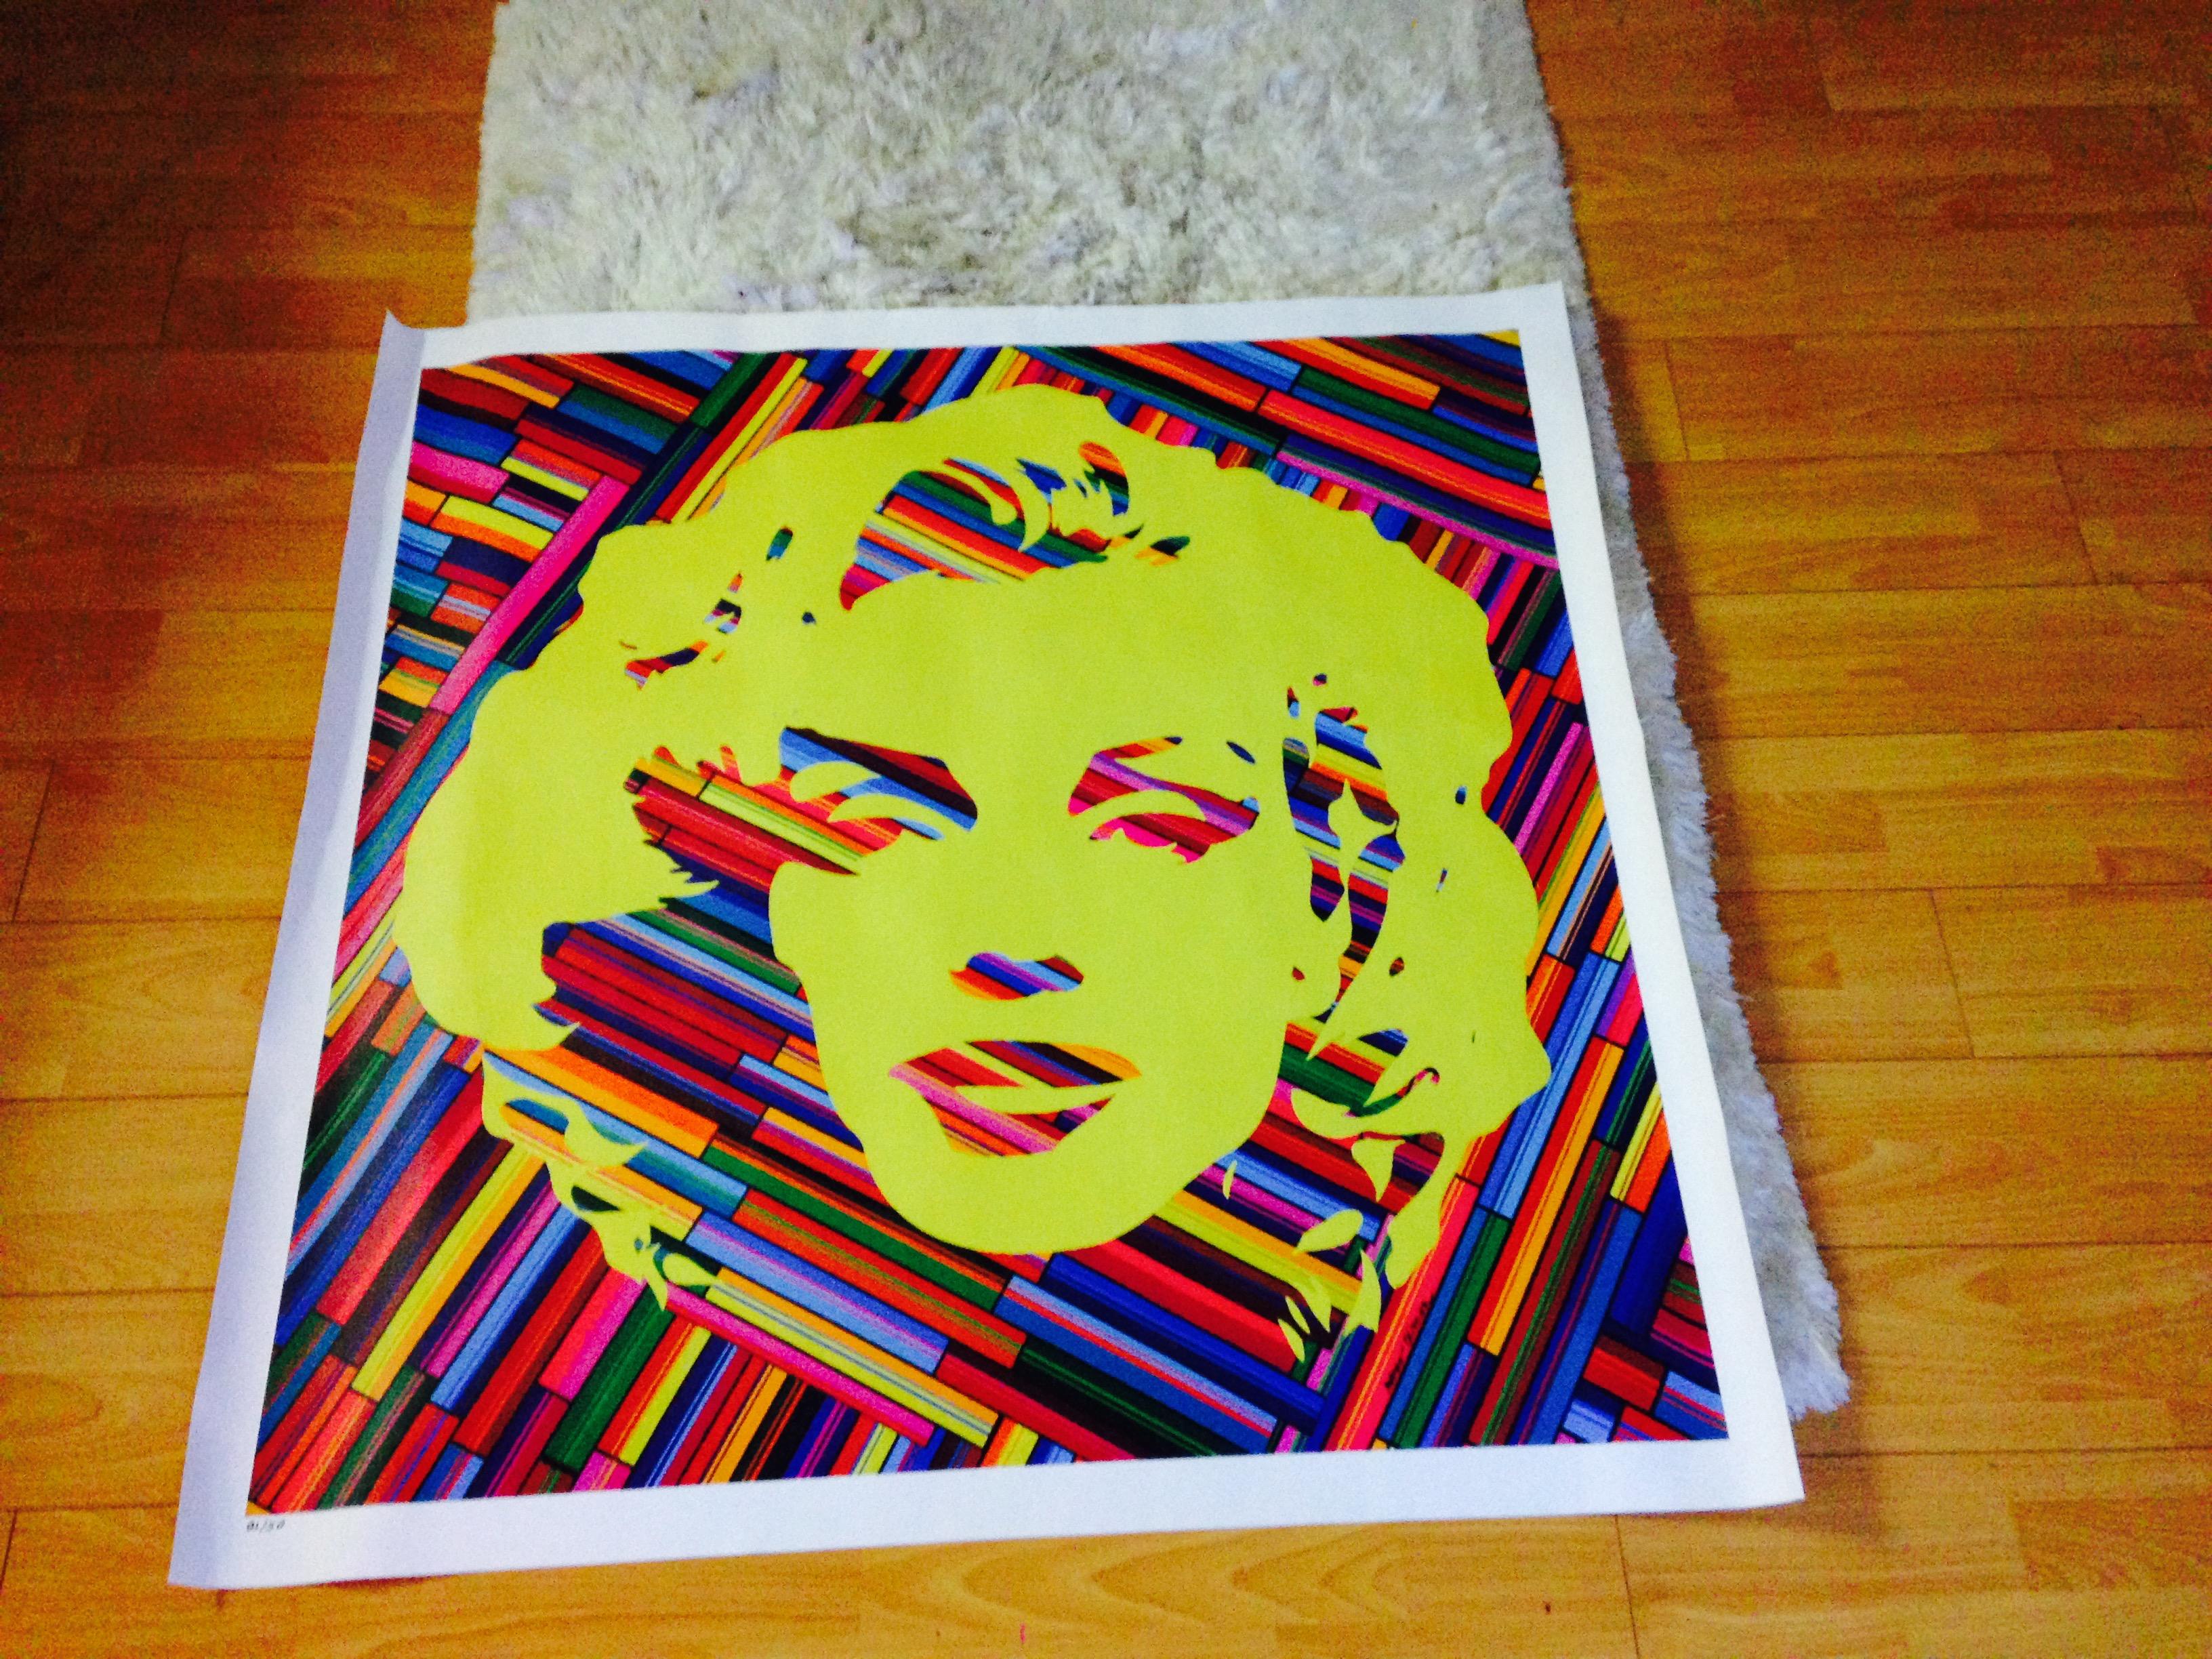 Celebrating the one and only Marilyn Monroe by Mauro Oliveira. 

Limited edition of 30 museum quality Giclee prints on CANVAS, signed and numbered by the artist. Print lead time 1 week. 

A 